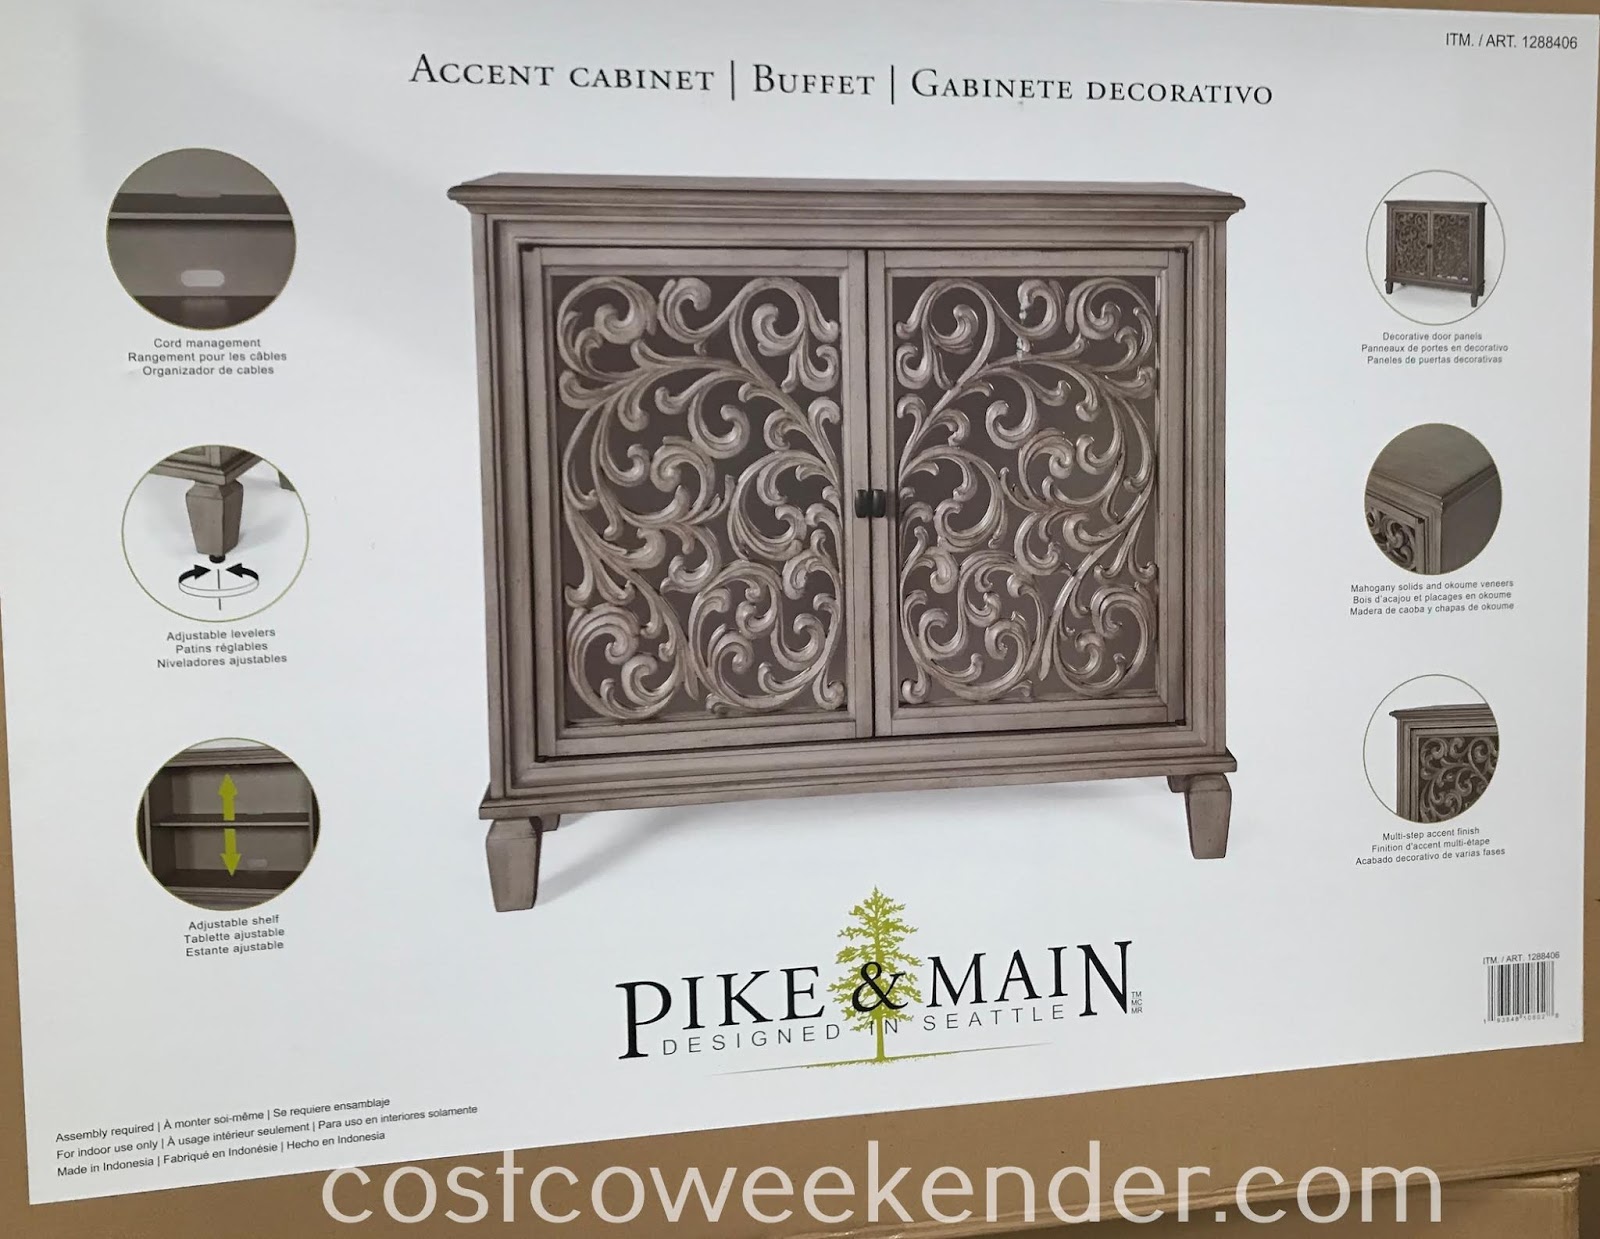 Pike Main Hermoine Accent Cabinet Costco Weekender